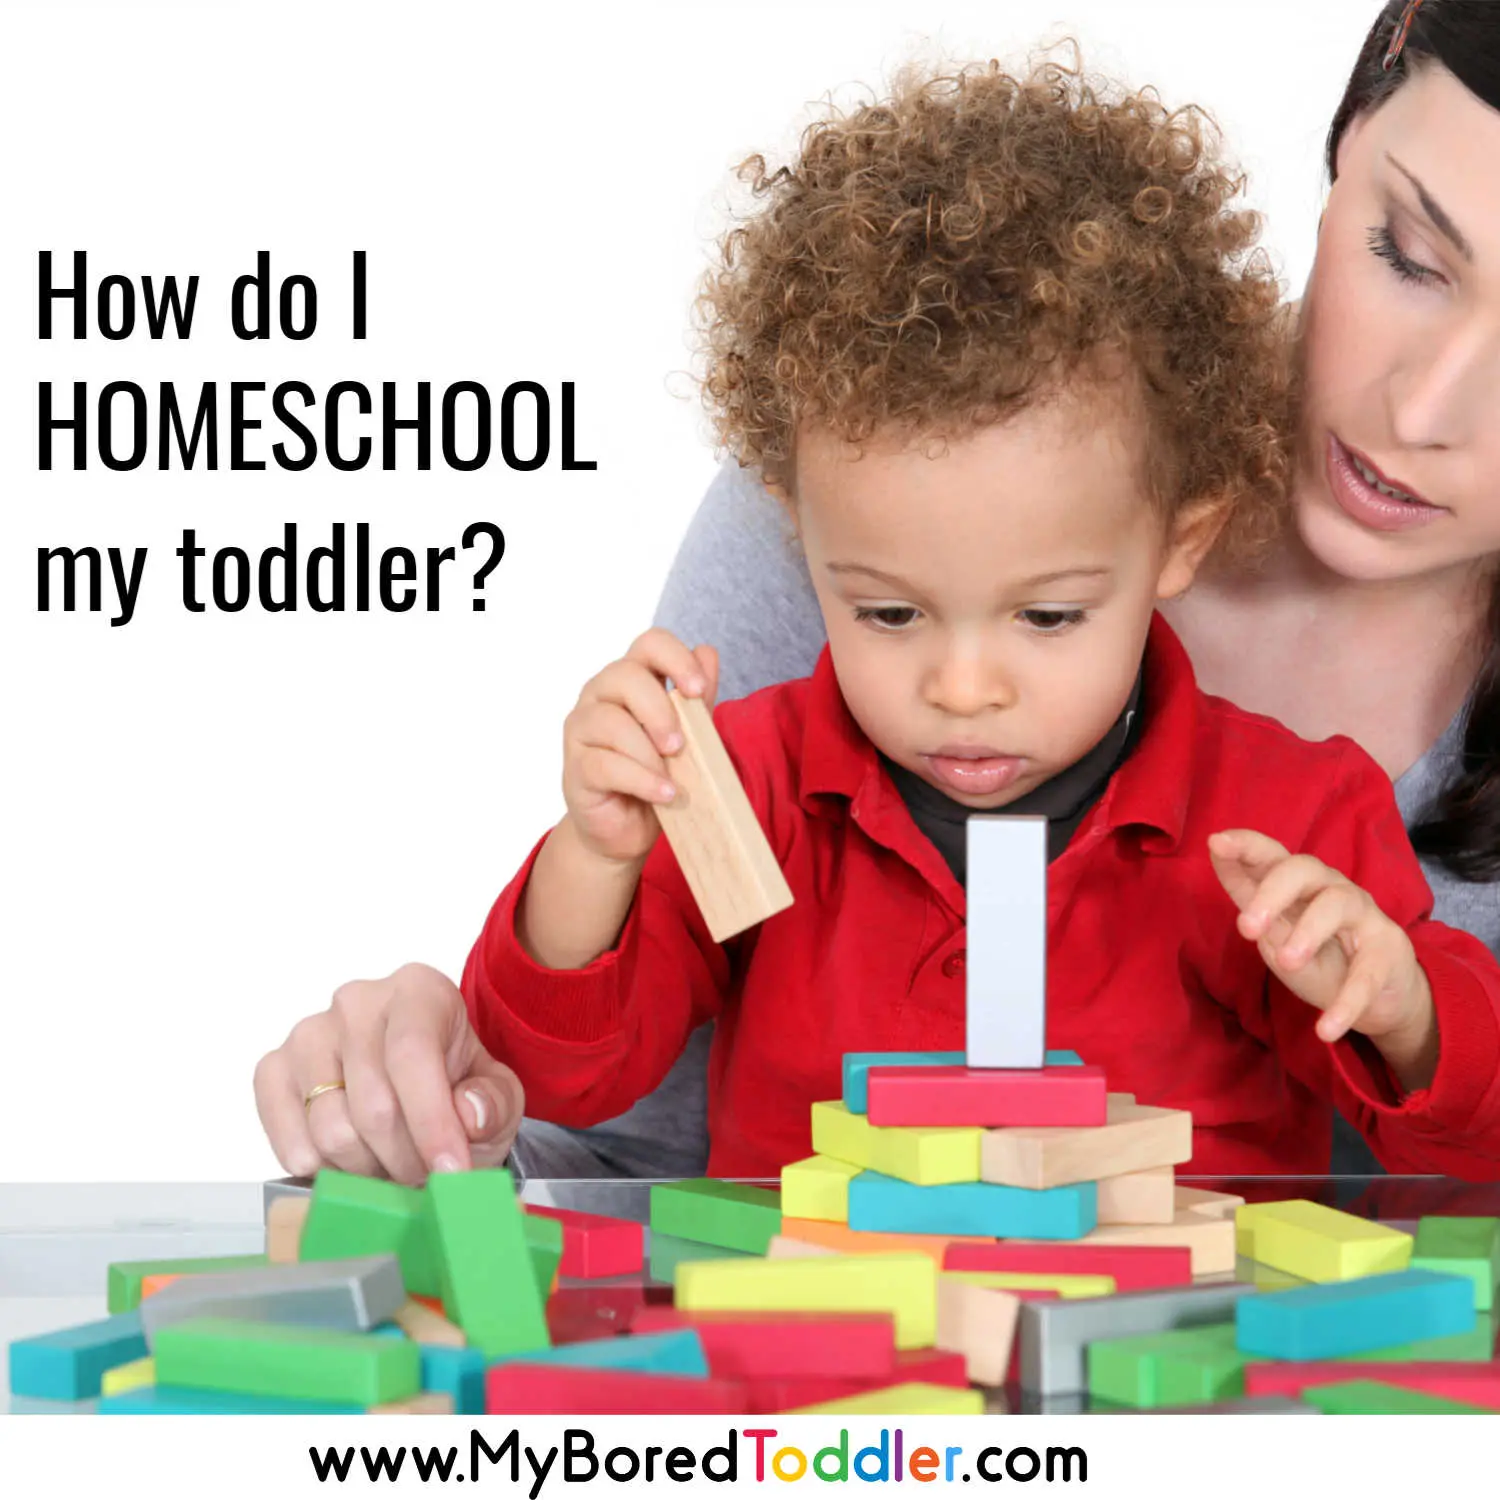 How do I homeschool my toddler feature